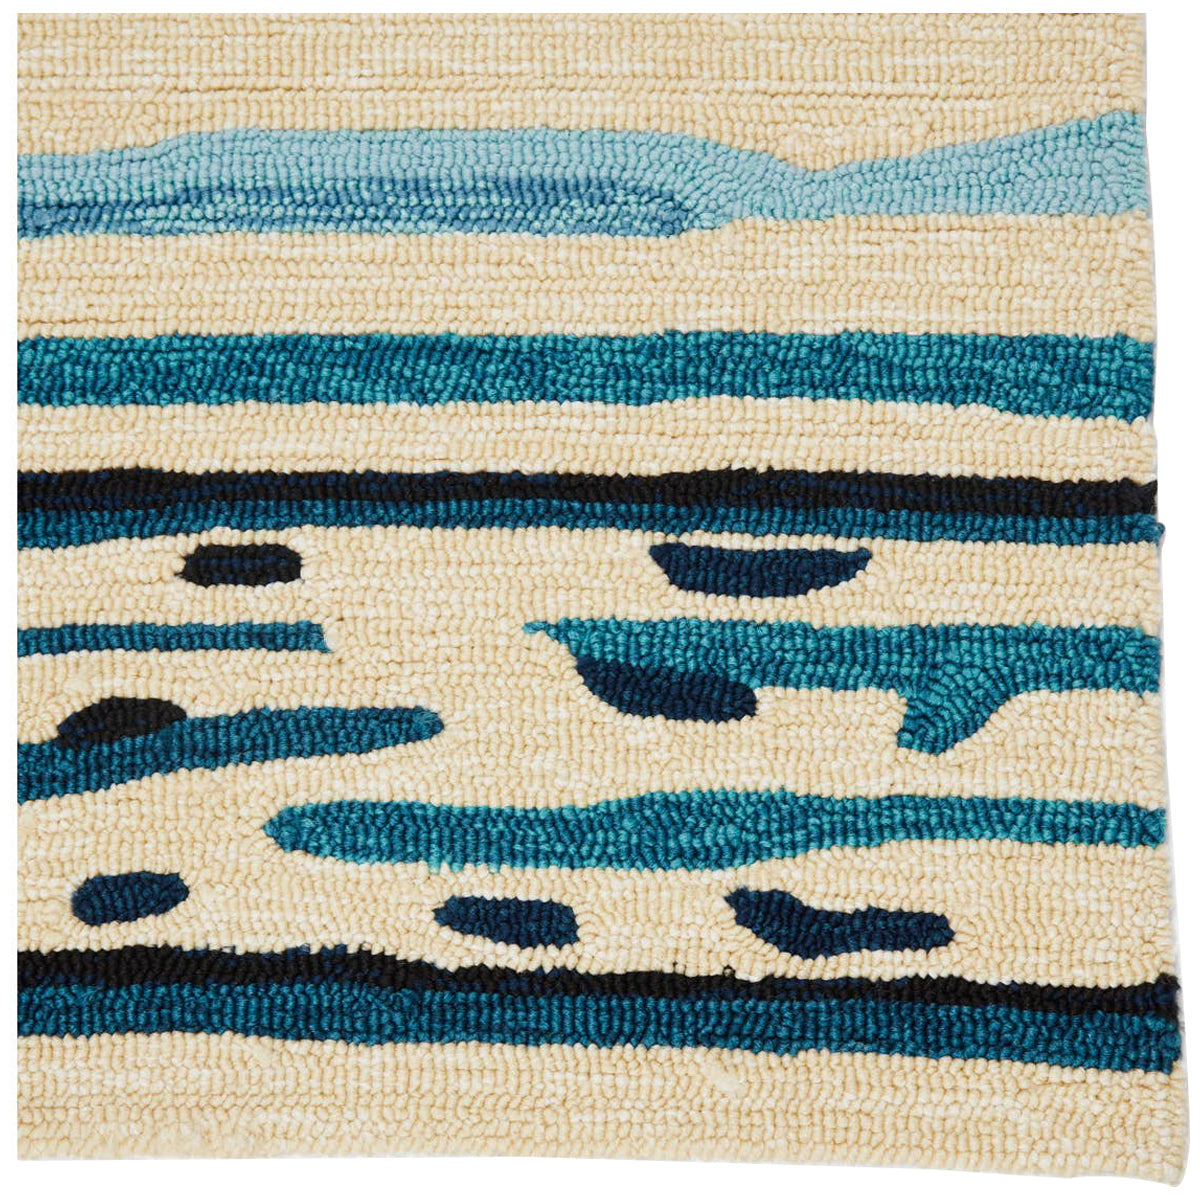 Jaipur Colours Sketchy Lines Blue/White CO19 Area Rug